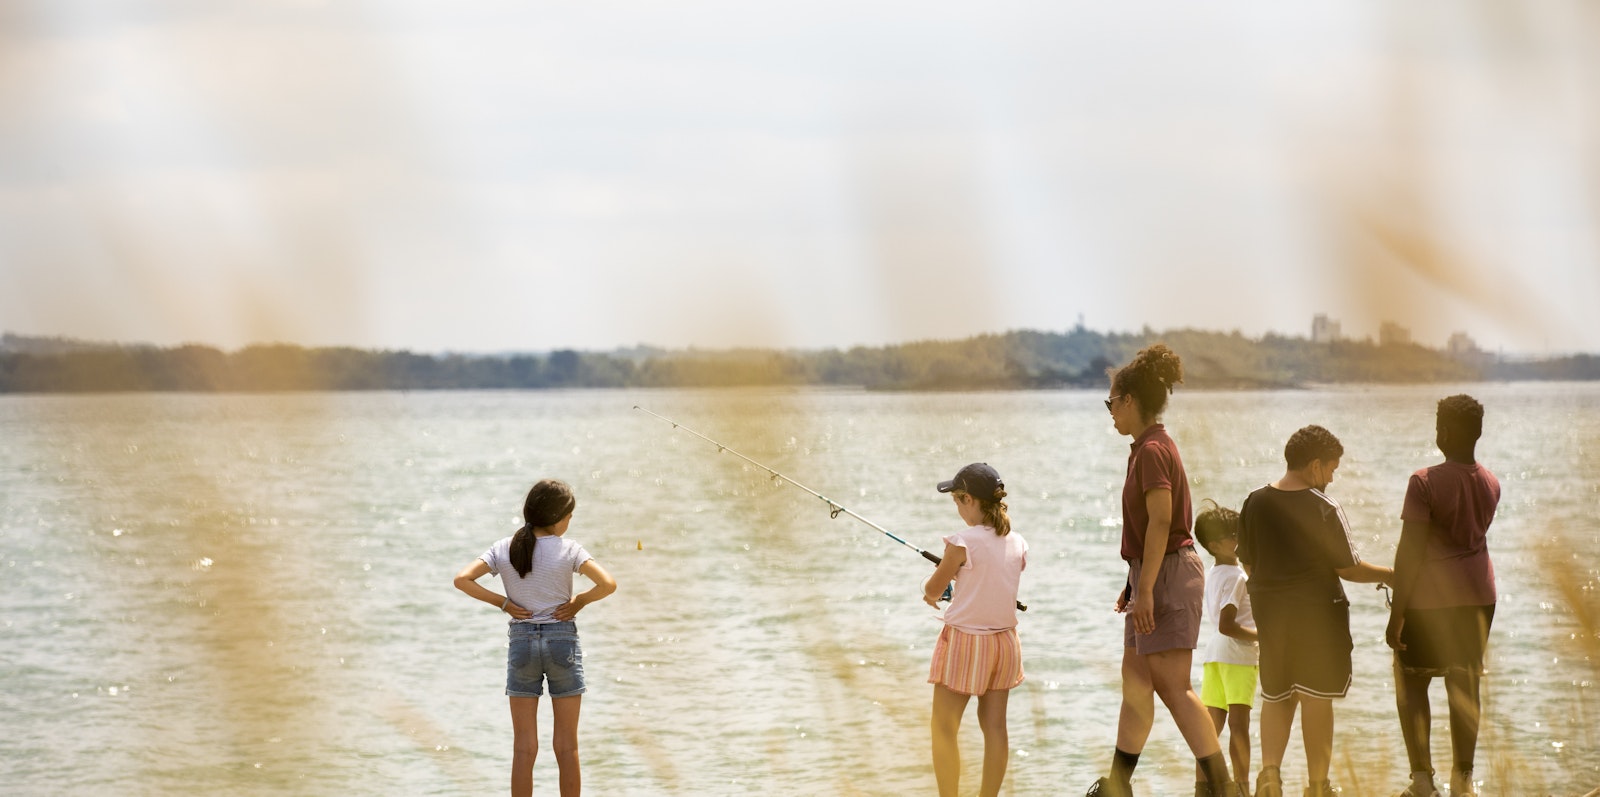 A group of children fly fishing in front of a body of water